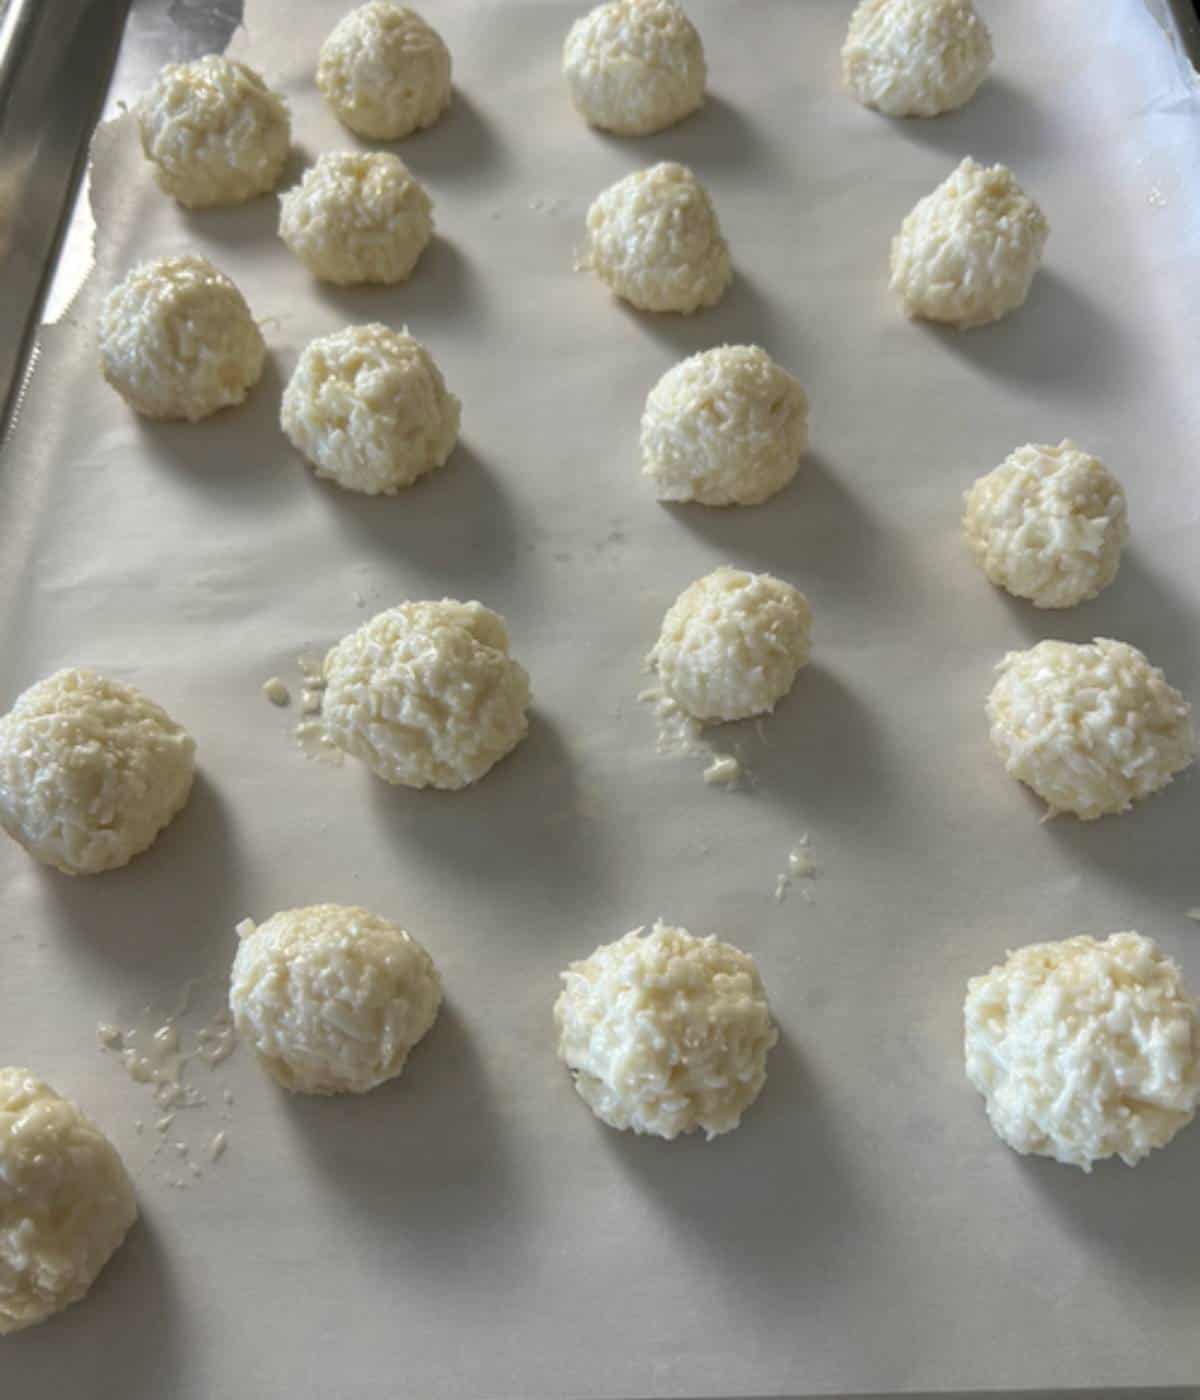 Coconut mixture rolled into balls on parchment lined cookie sheet.